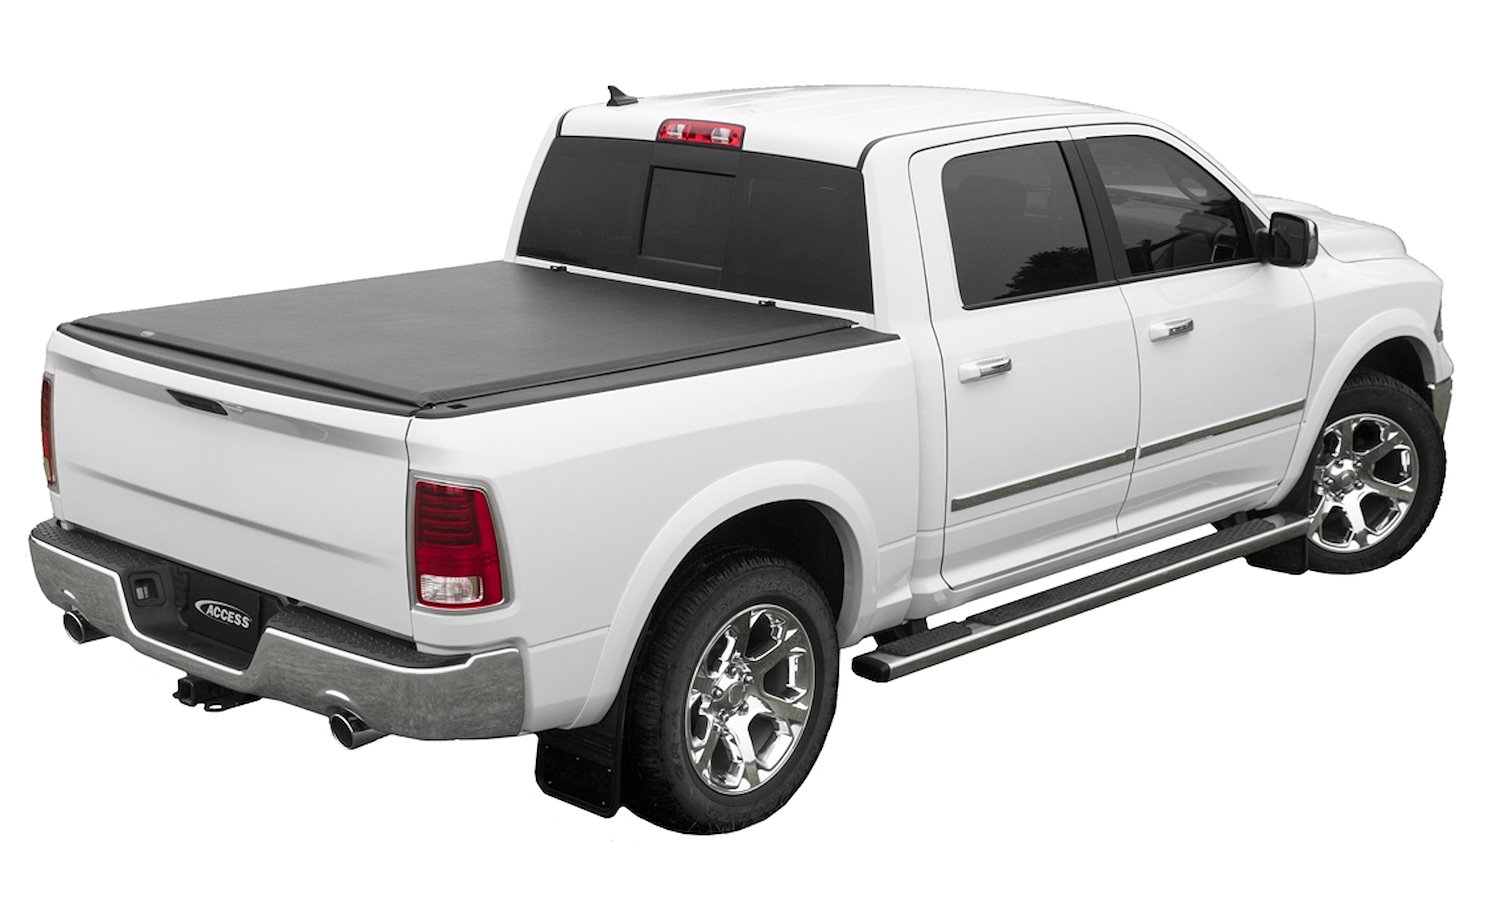 LORADO Roll-Up Tonneau Cover, 2012-2018 Ram 1500, Fits Select Ram Classic/2500/3500, with 6 ft. 4 in. Bed w/RamBed